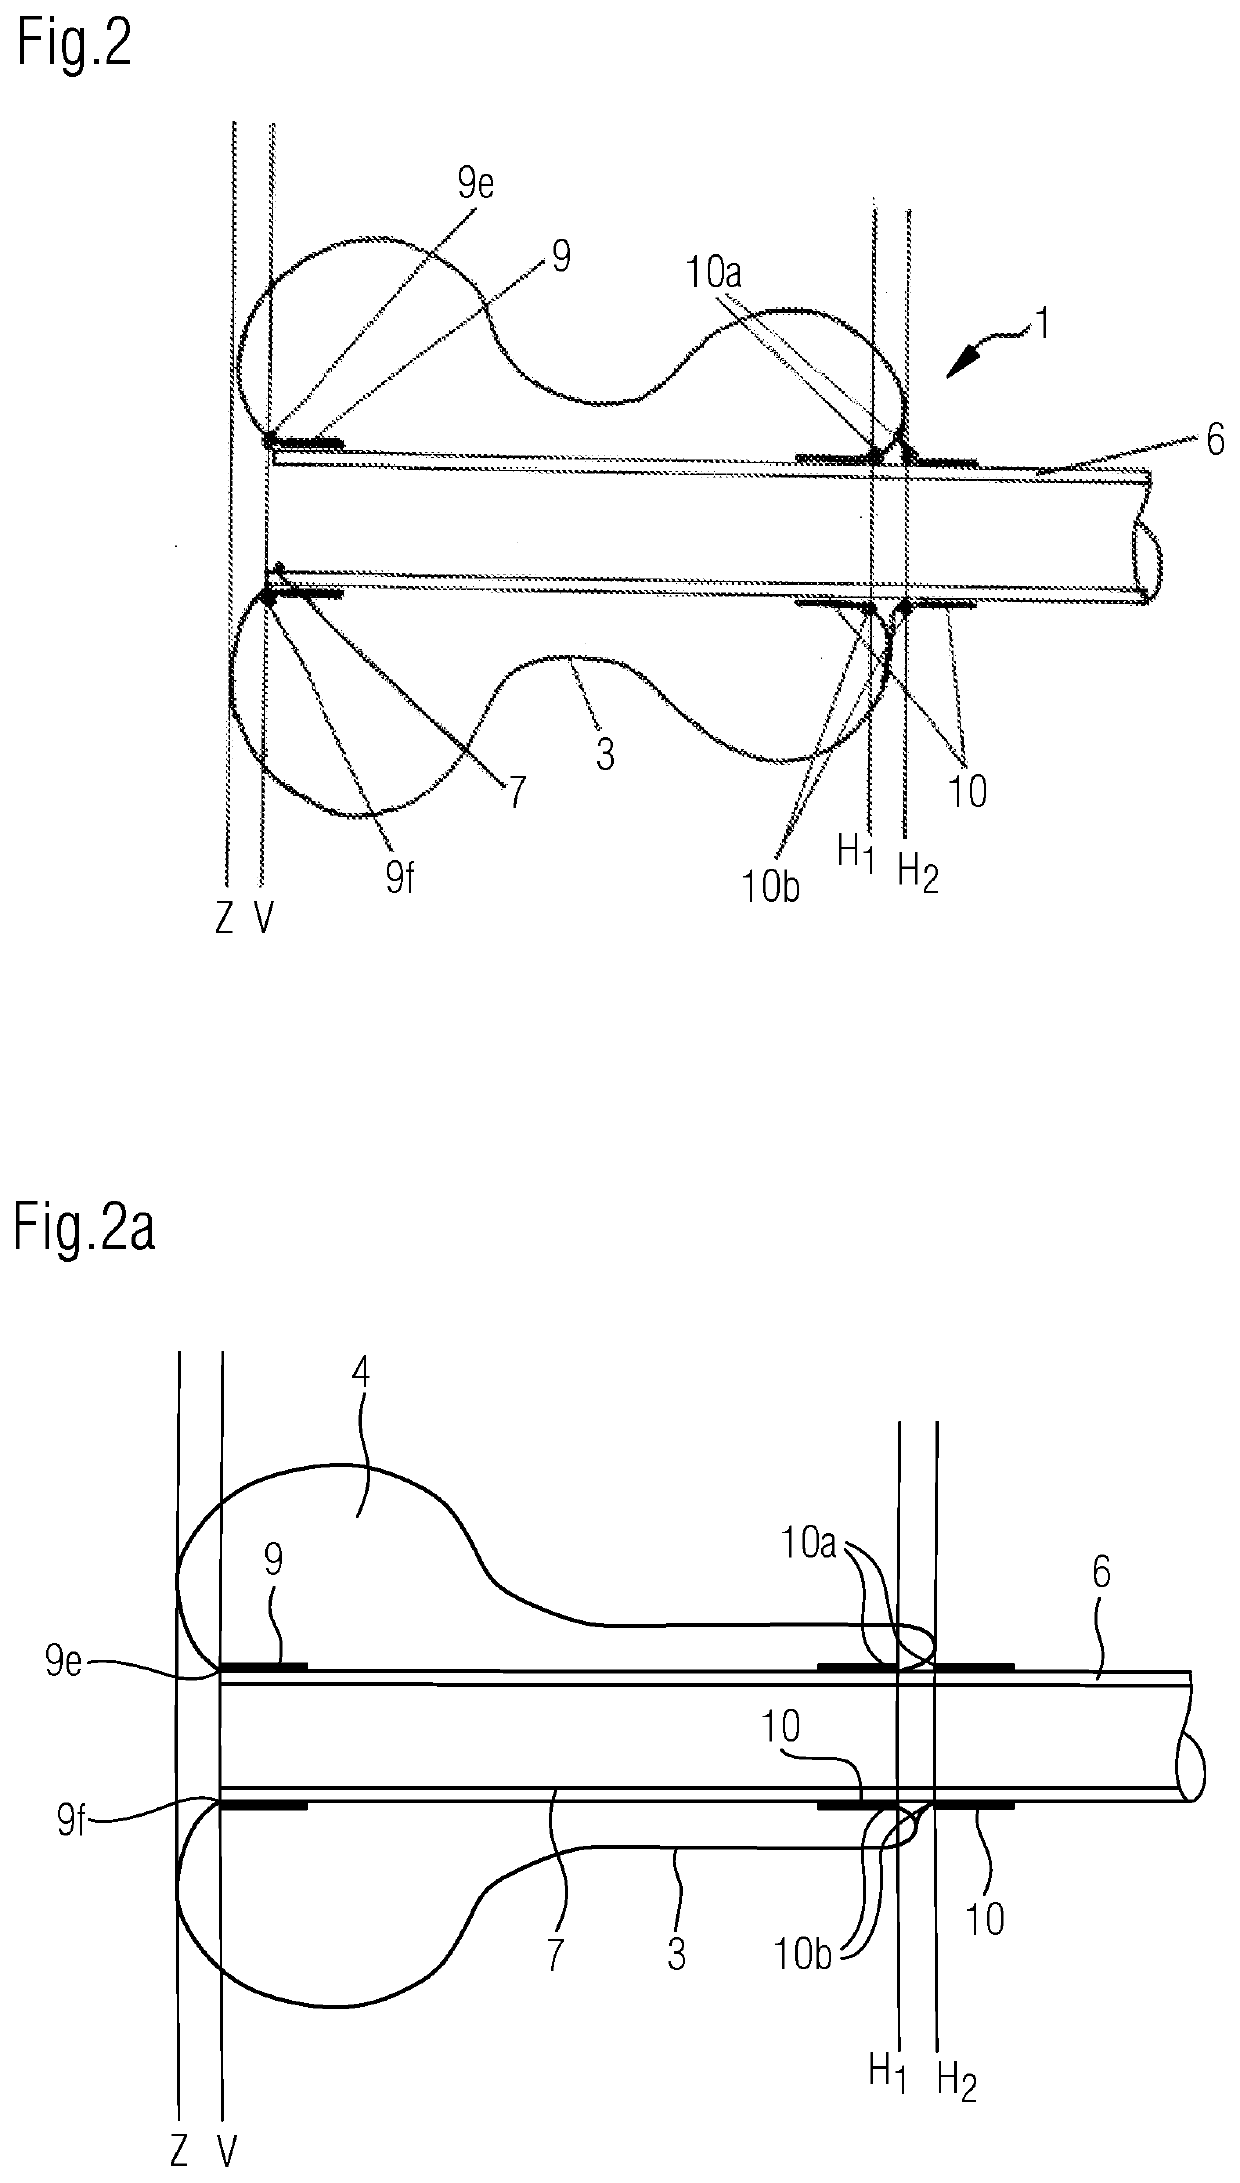 Method and device for the trans-anal drainage of stool from the rectum of a patient and/or for the trans-anal application of inflowing liquid through a catheter-like element